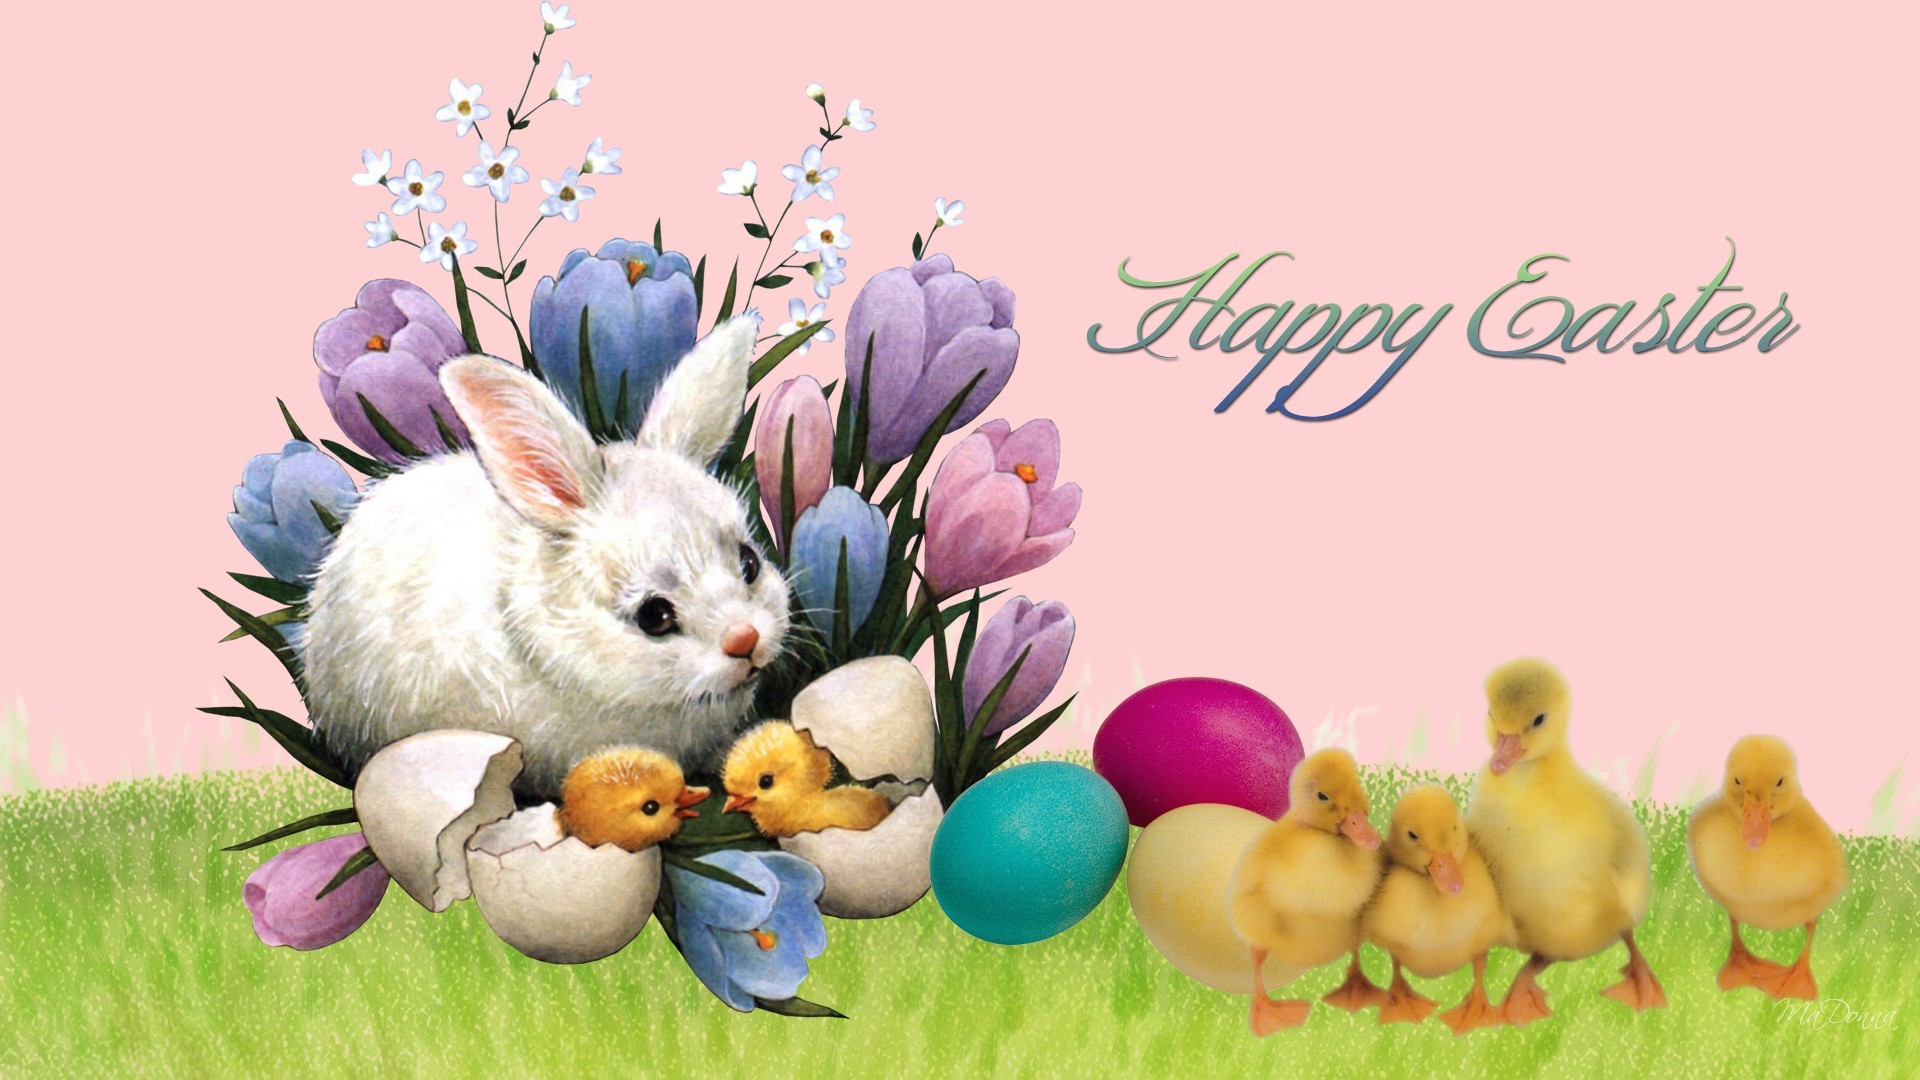 1920x1080 Happy Easter cute bunny ,chicks, eggs hd wallpapers, images for you